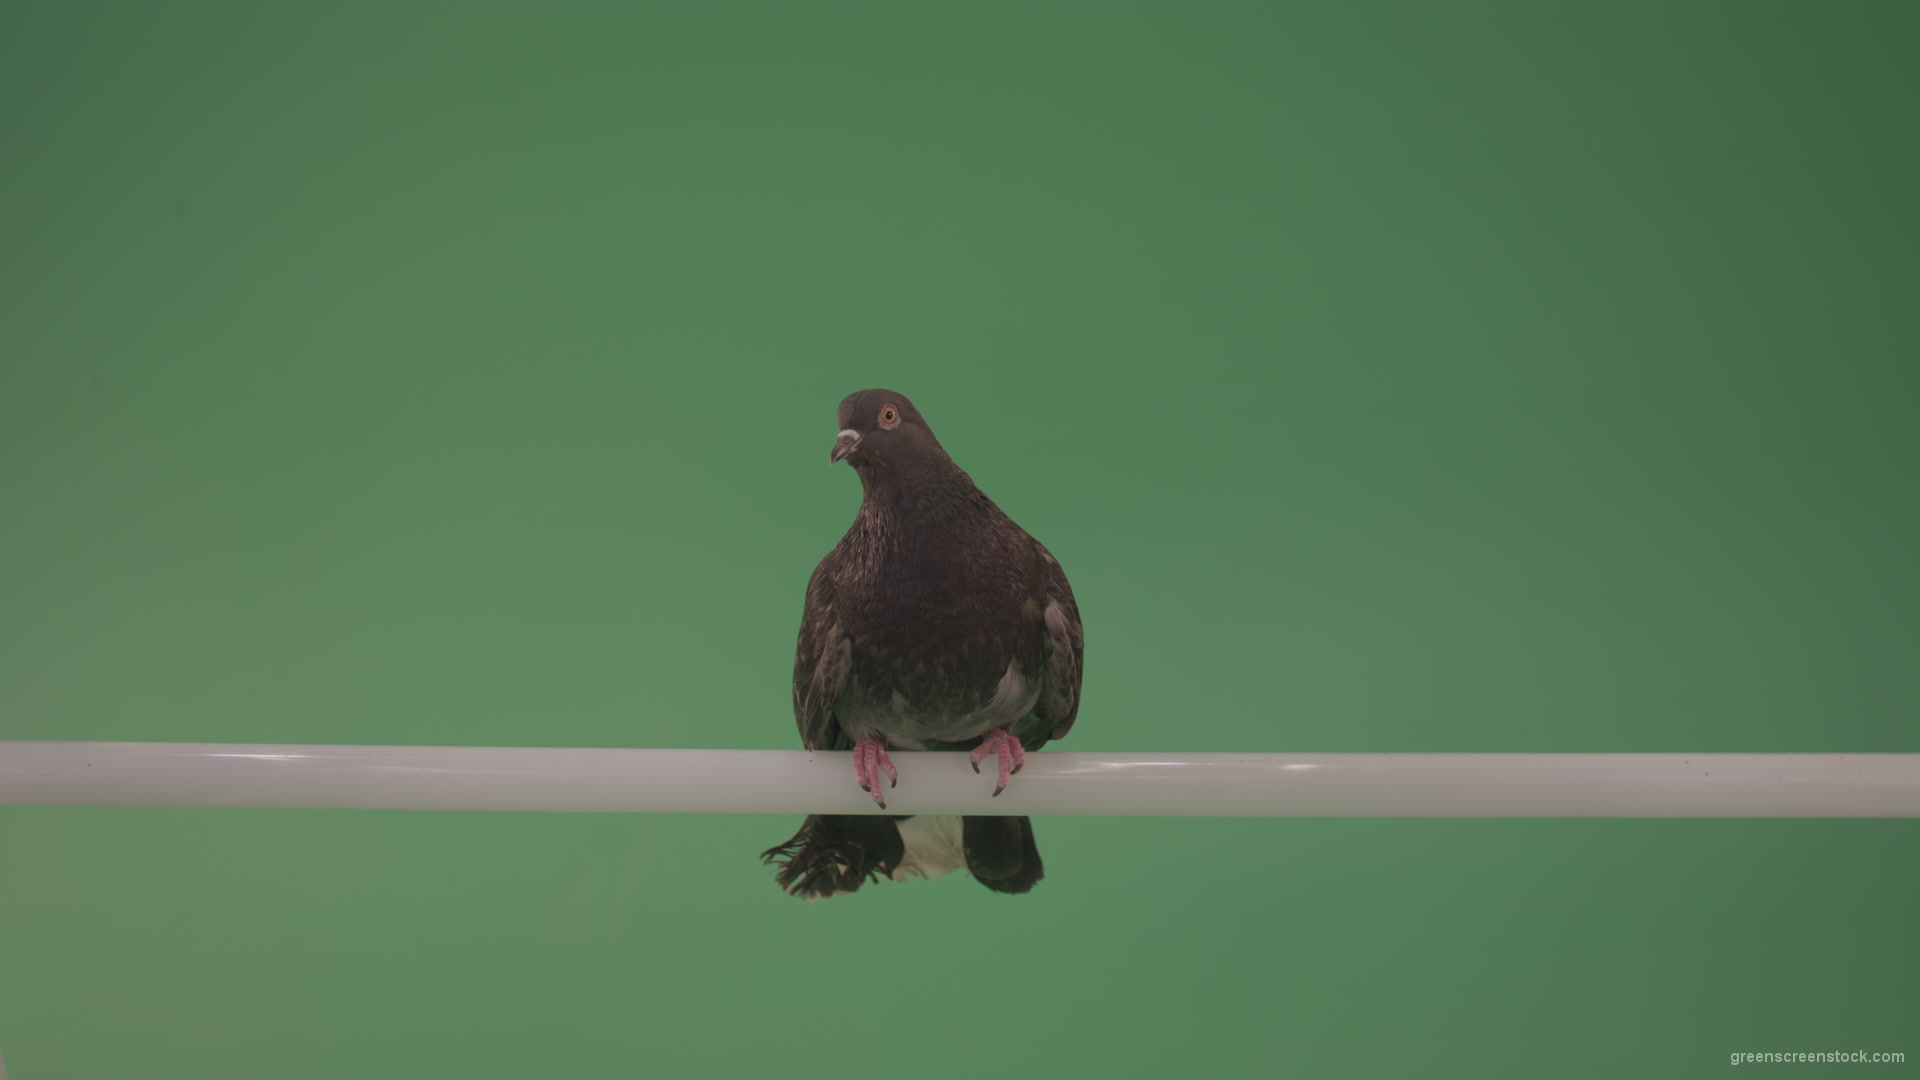 Wild-bird-doves-sit-on-the-branch-and-peer-around-isolated-on-green-screen_007 Green Screen Stock